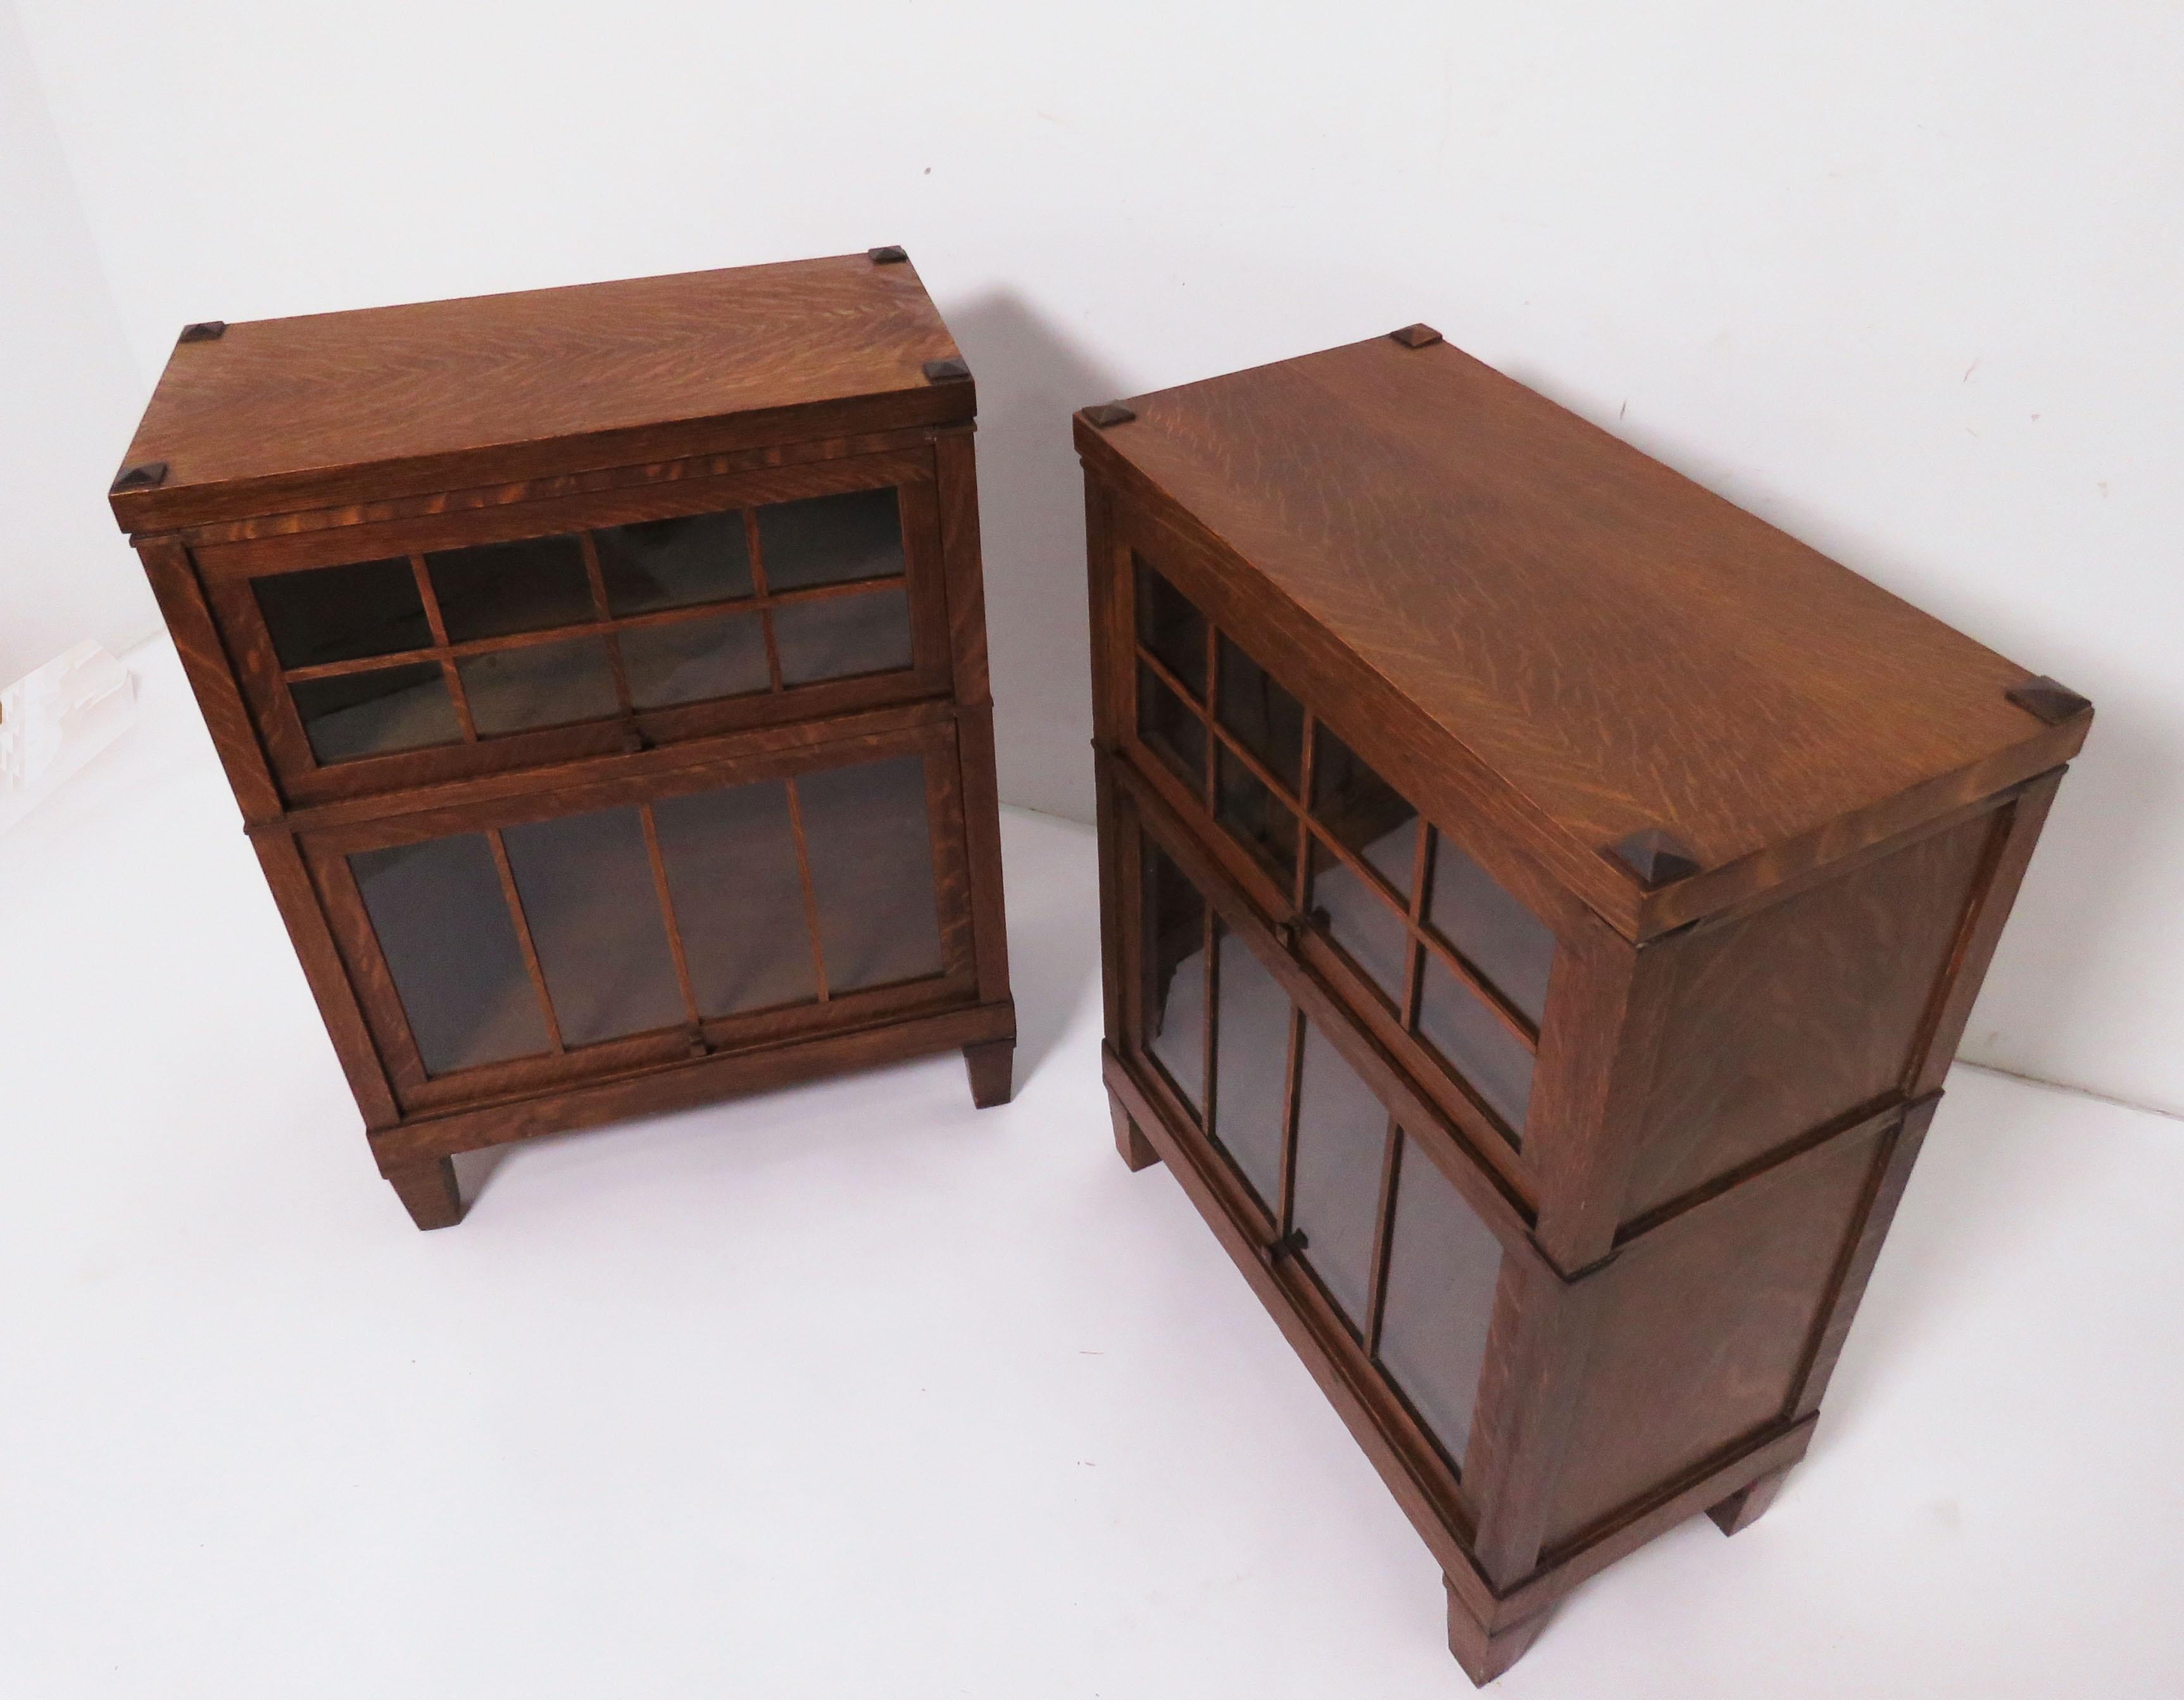 A pair of Mission style barrister cabinets in quartersawn oak by the Macey Co., of Grand Rapids, Wi., circa 1910. These are the rare, narrow size, complete with original bases and lids, well suited for use as end or side cabinets in an Arts & Crafts